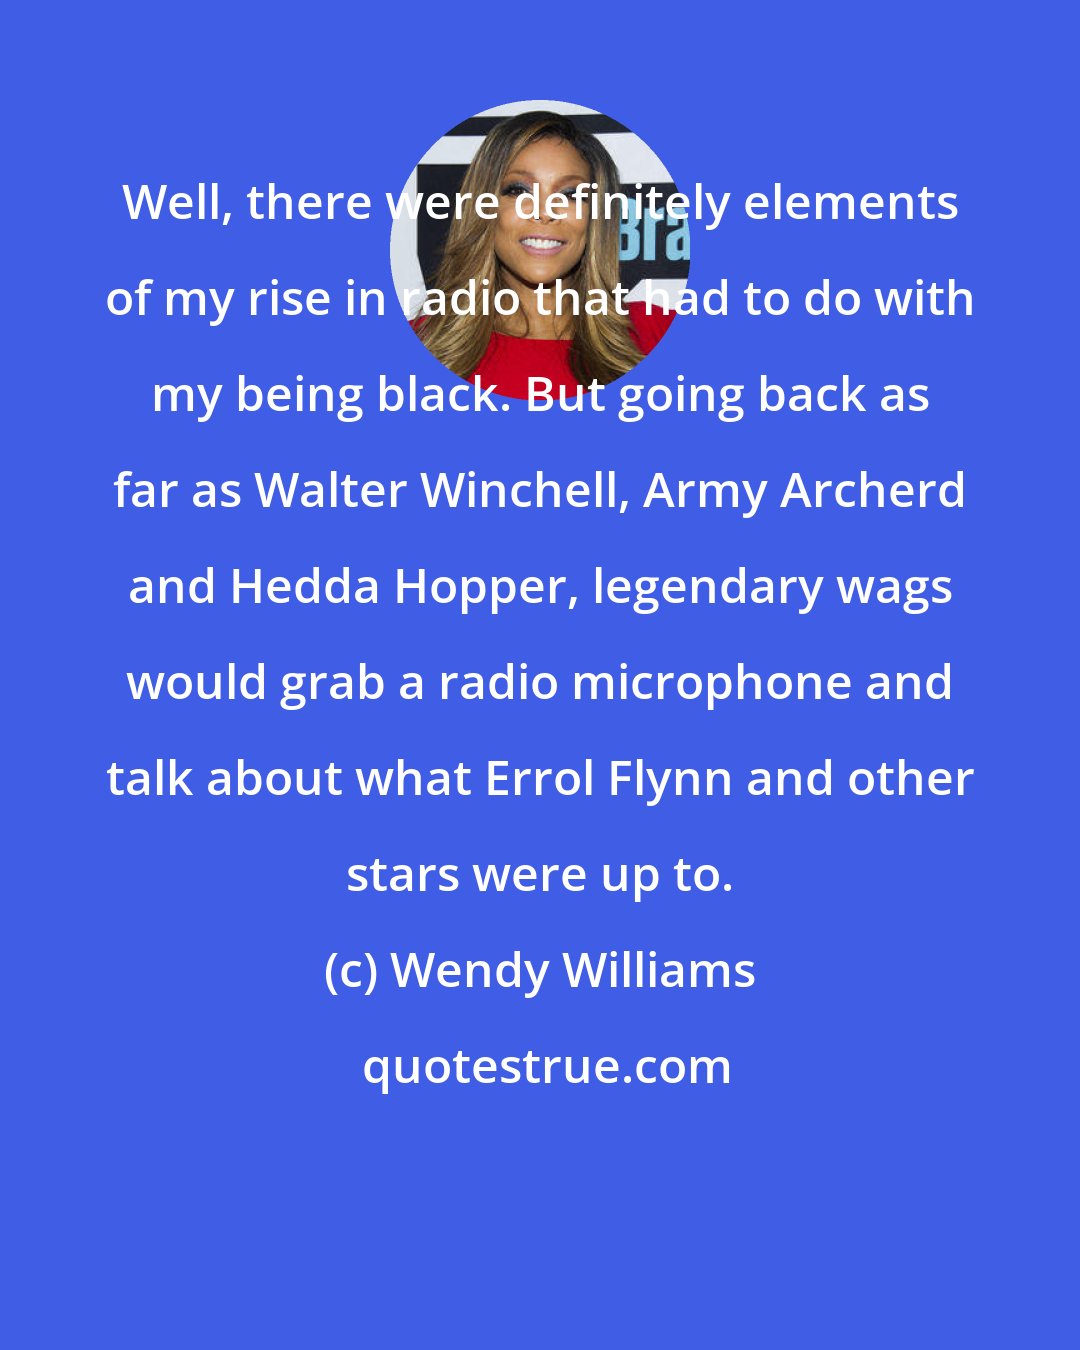 Wendy Williams: Well, there were definitely elements of my rise in radio that had to do with my being black. But going back as far as Walter Winchell, Army Archerd and Hedda Hopper, legendary wags would grab a radio microphone and talk about what Errol Flynn and other stars were up to.